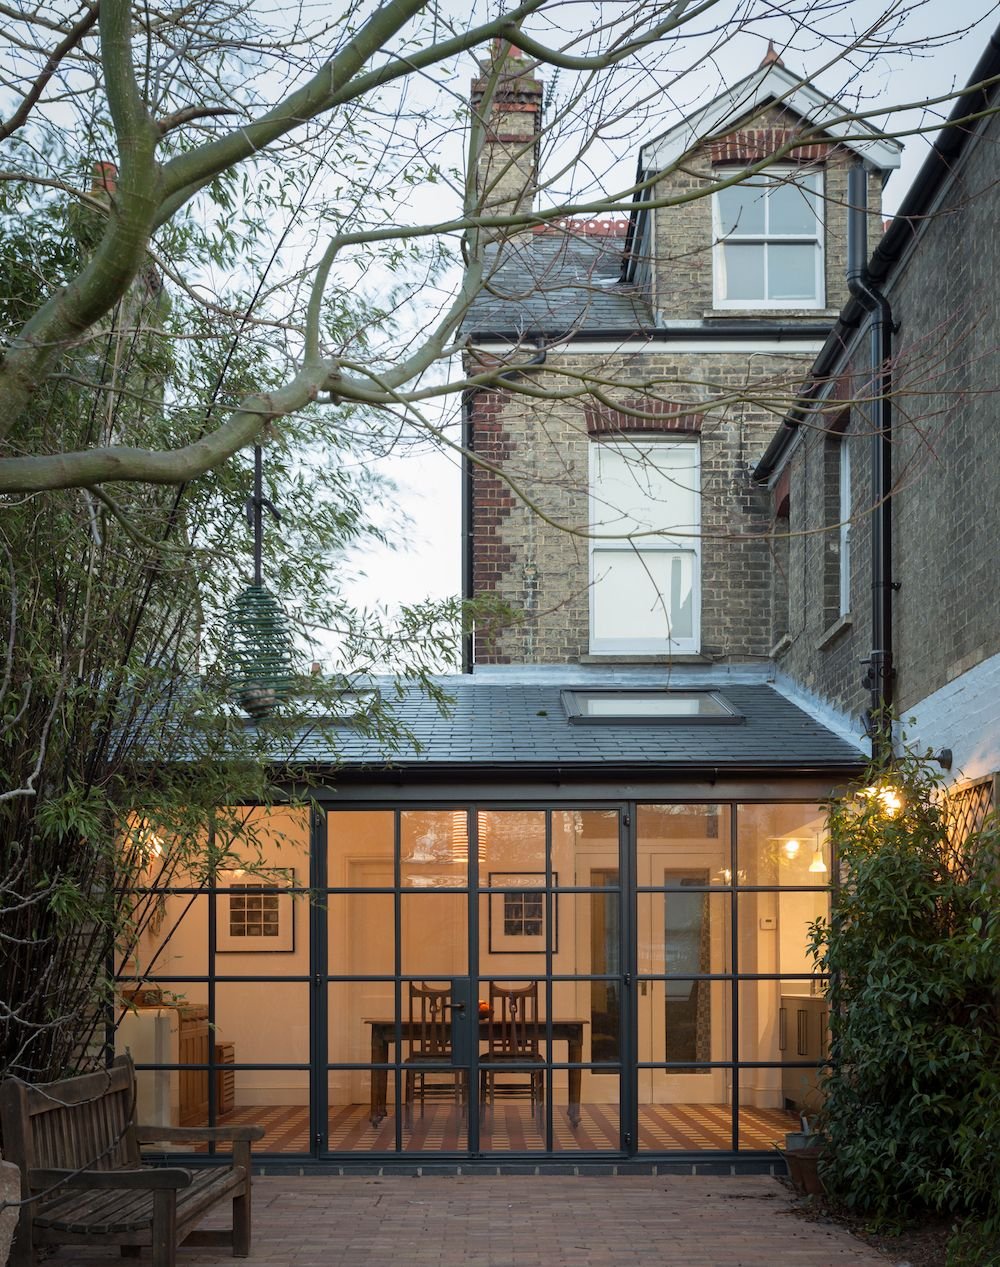 Learn how architects have breathed new life into a dated Victorian property